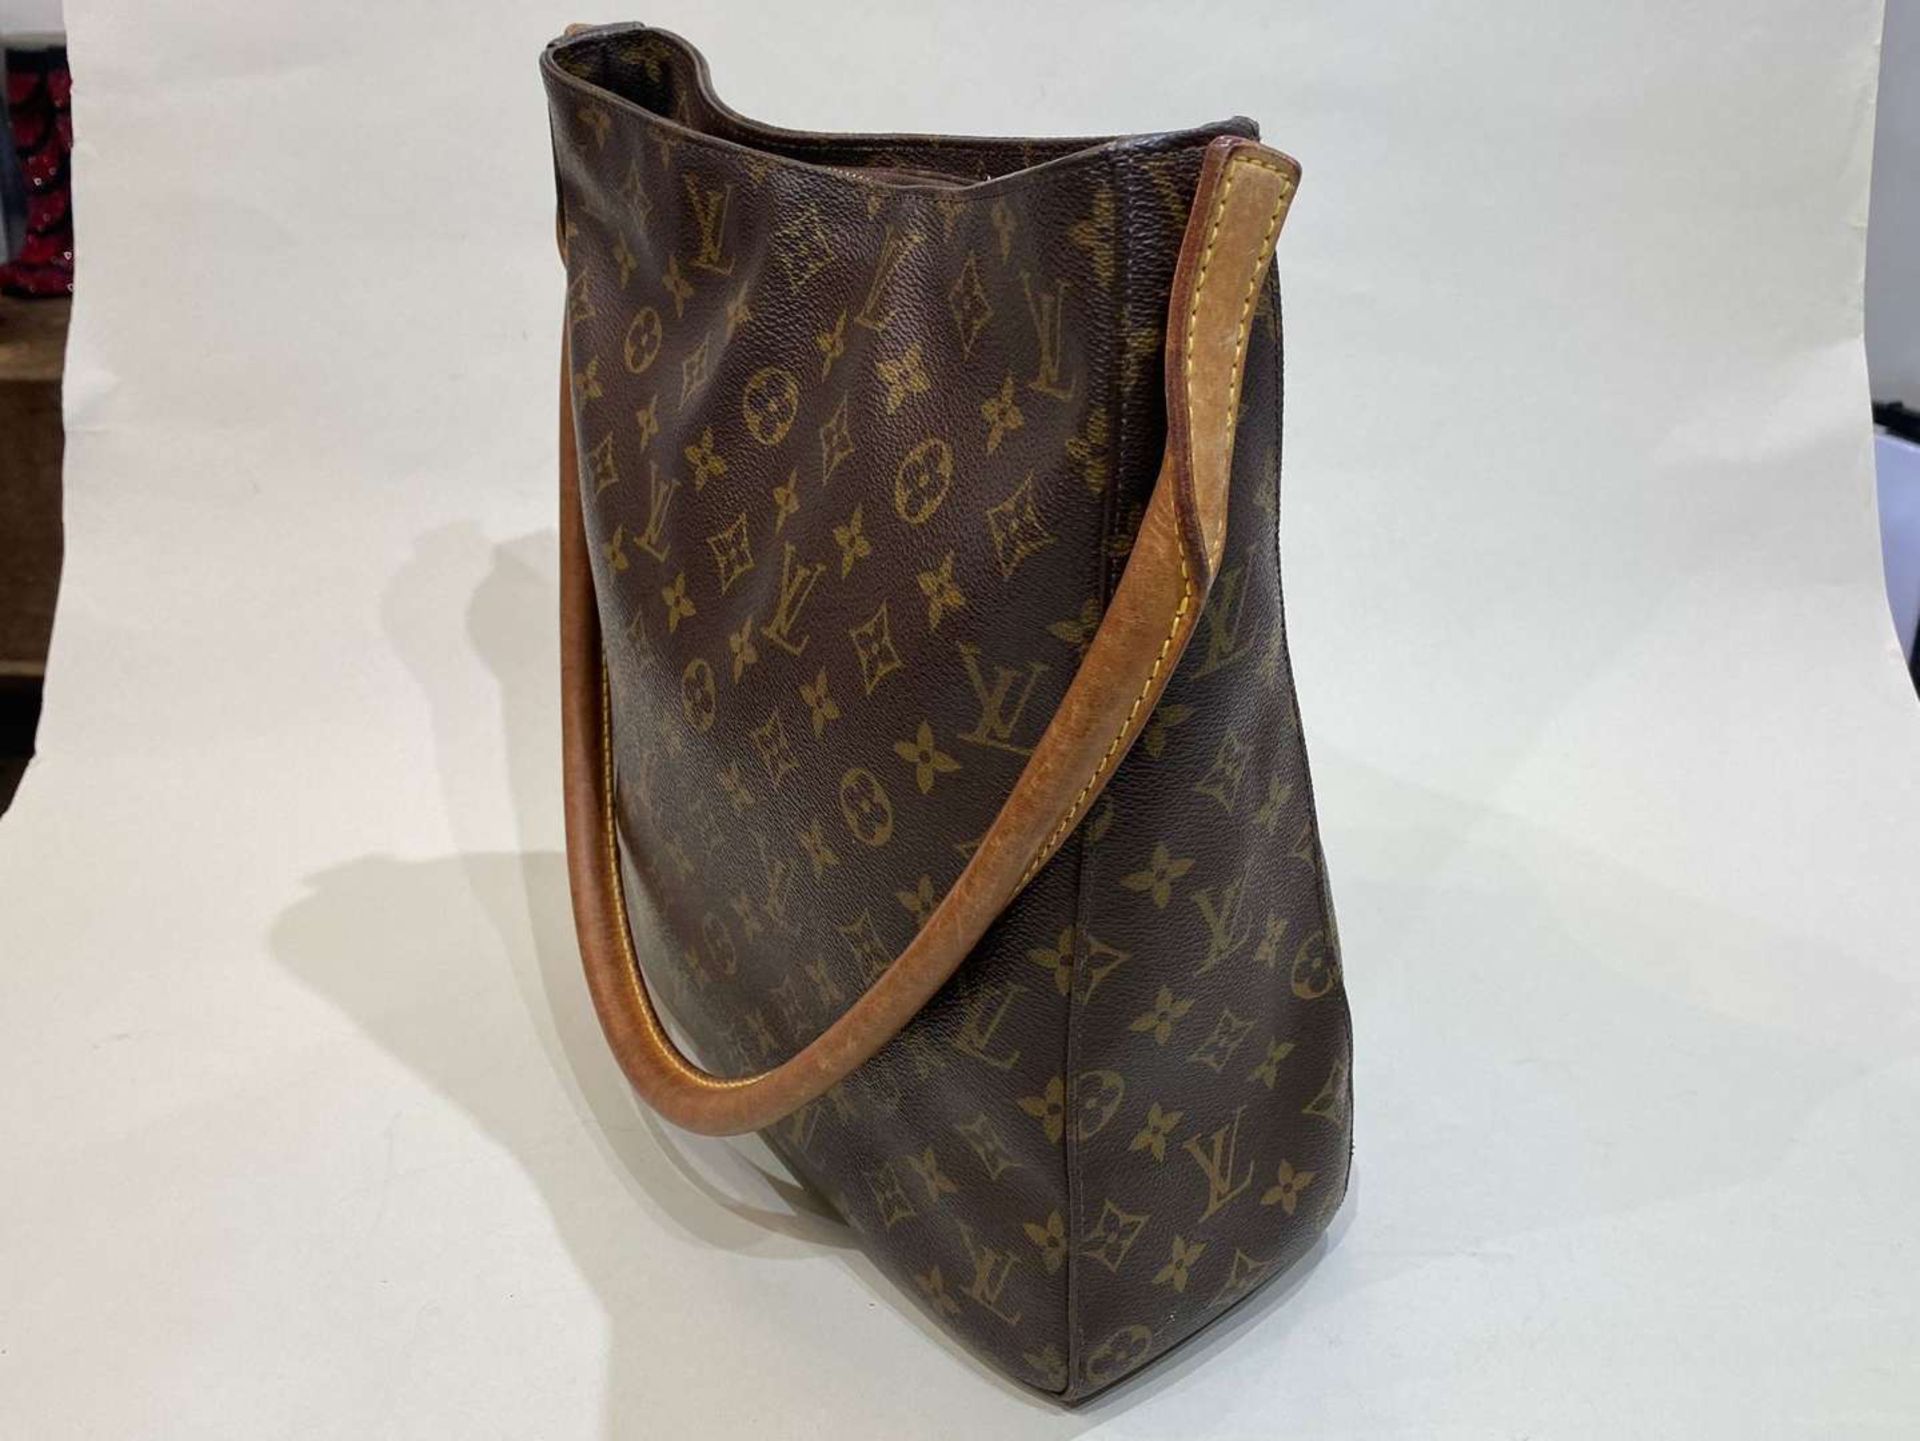 LOUIS VUITTON, Looping, tan stitched leather and monogrammed shoulder bag - Image 4 of 7